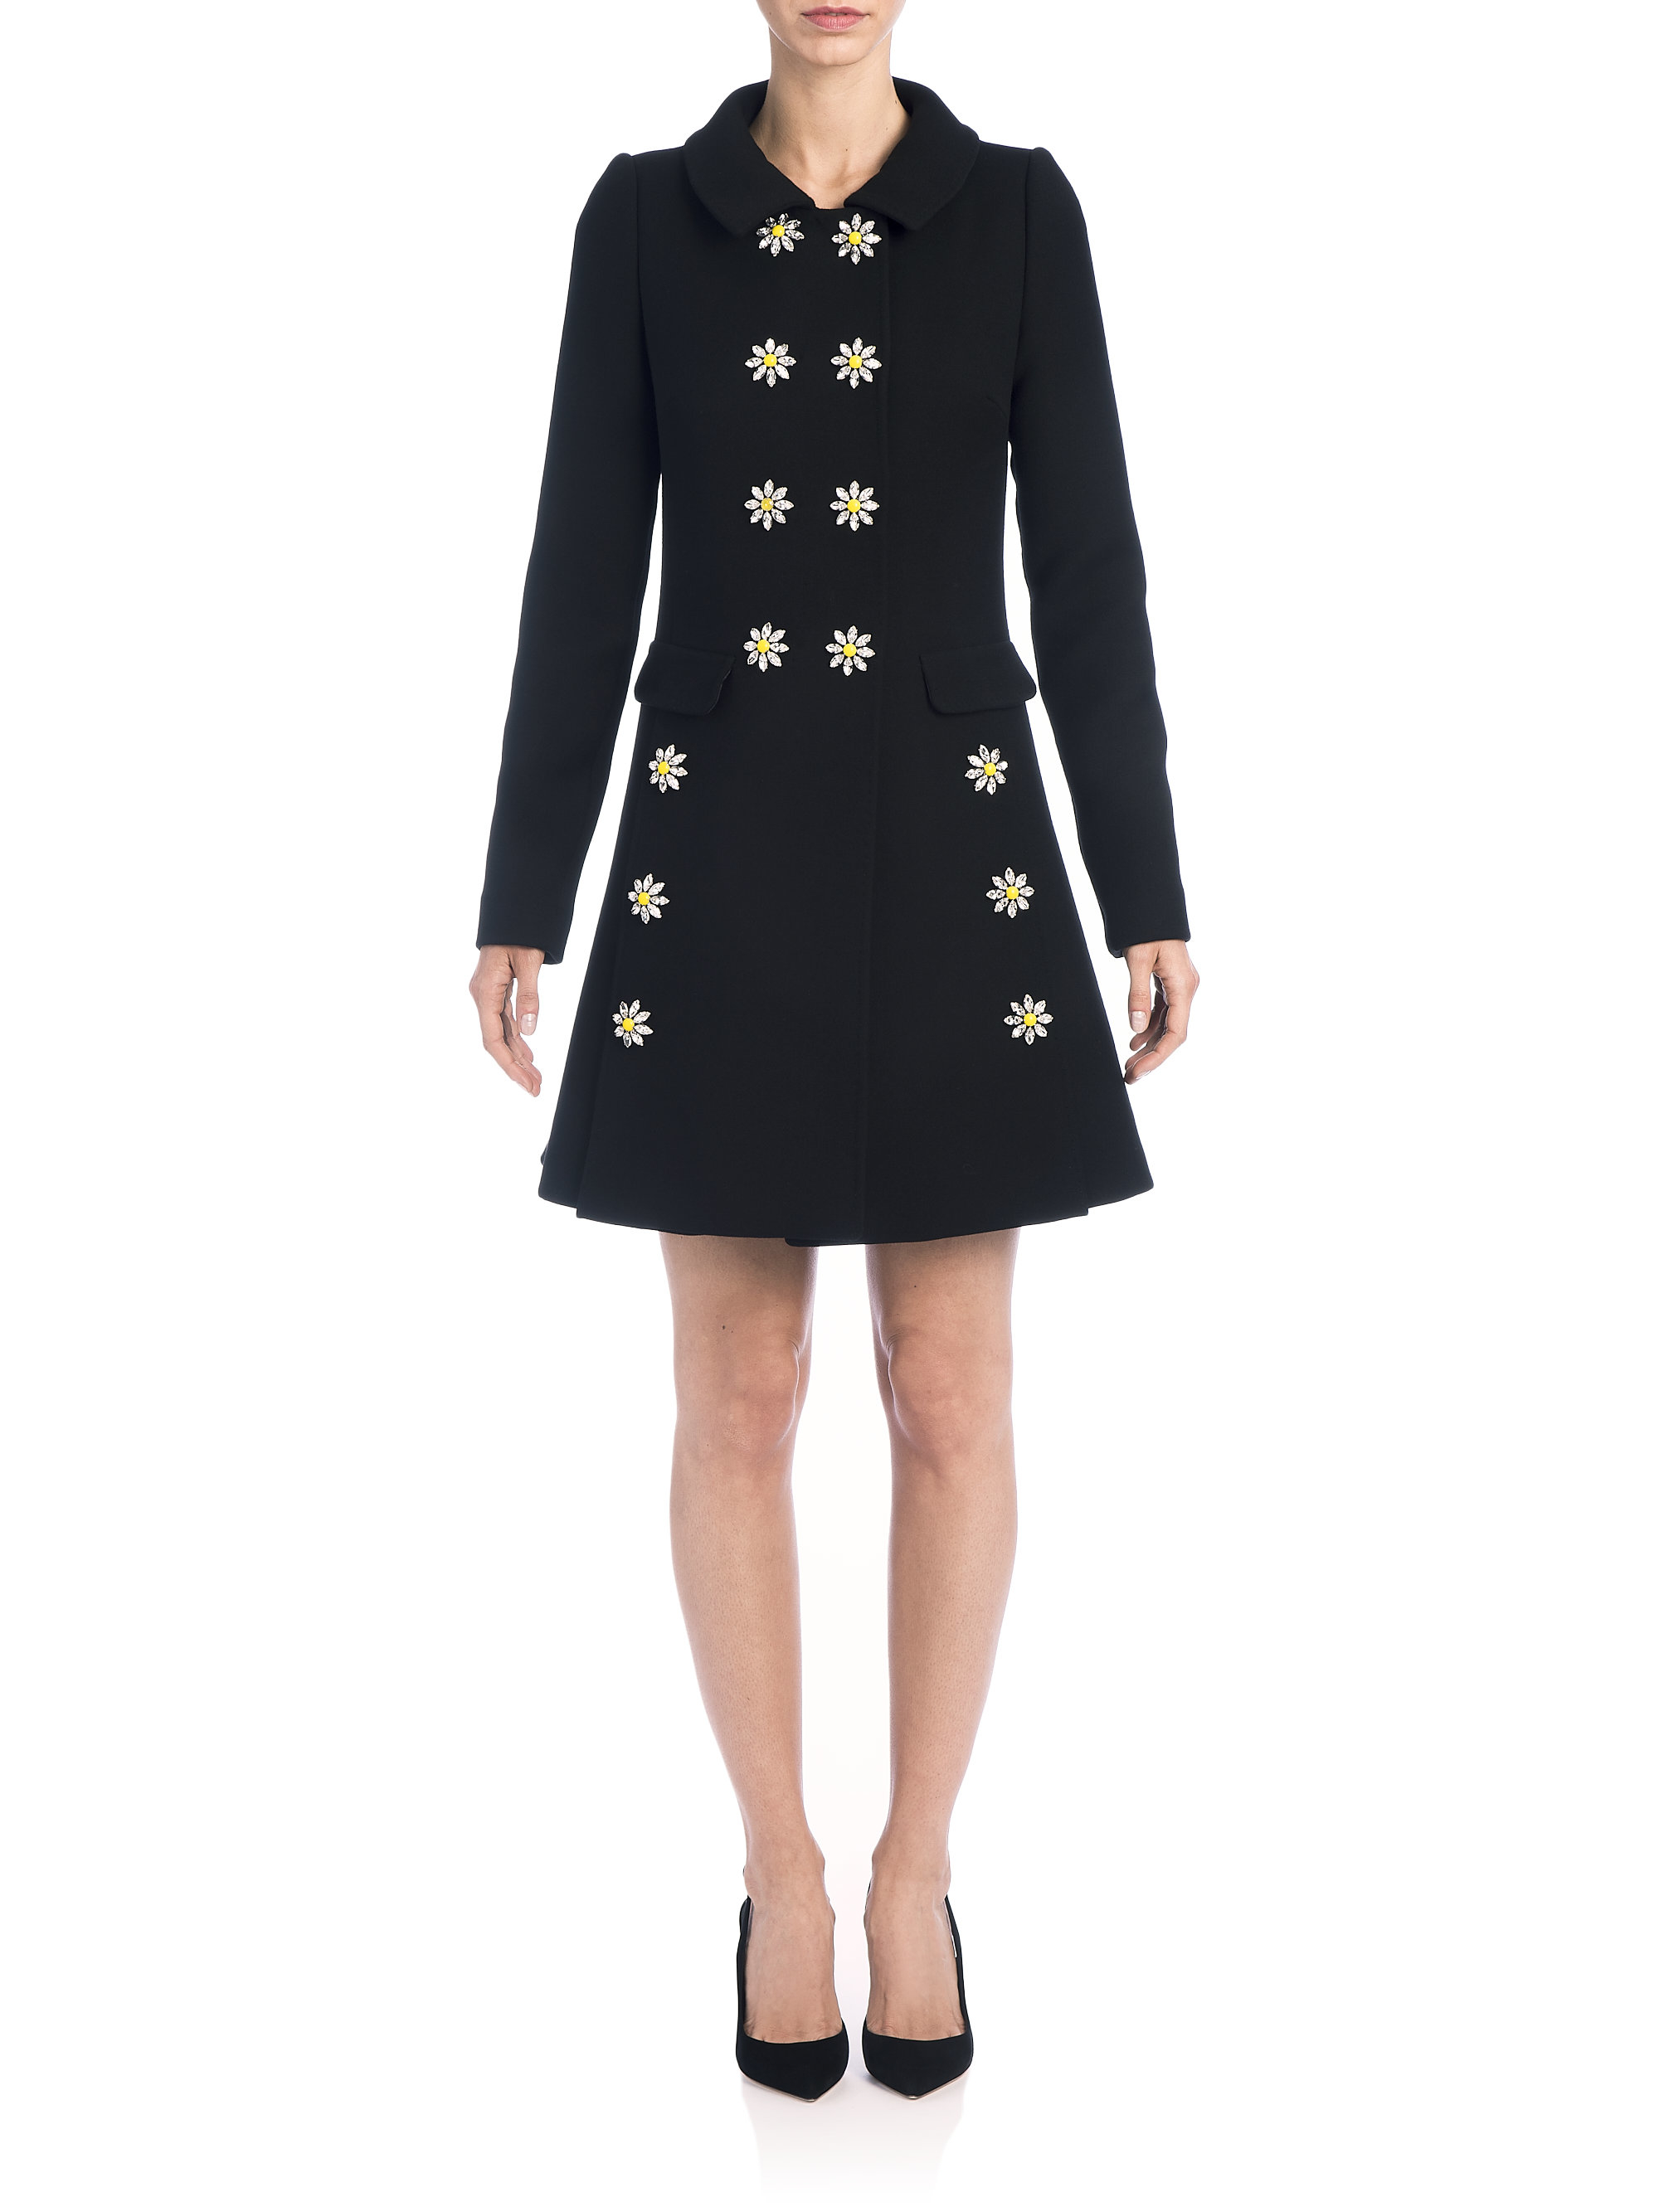 Dolce & gabbana Embellished-daisy Double-breasted Coat in Black | Lyst